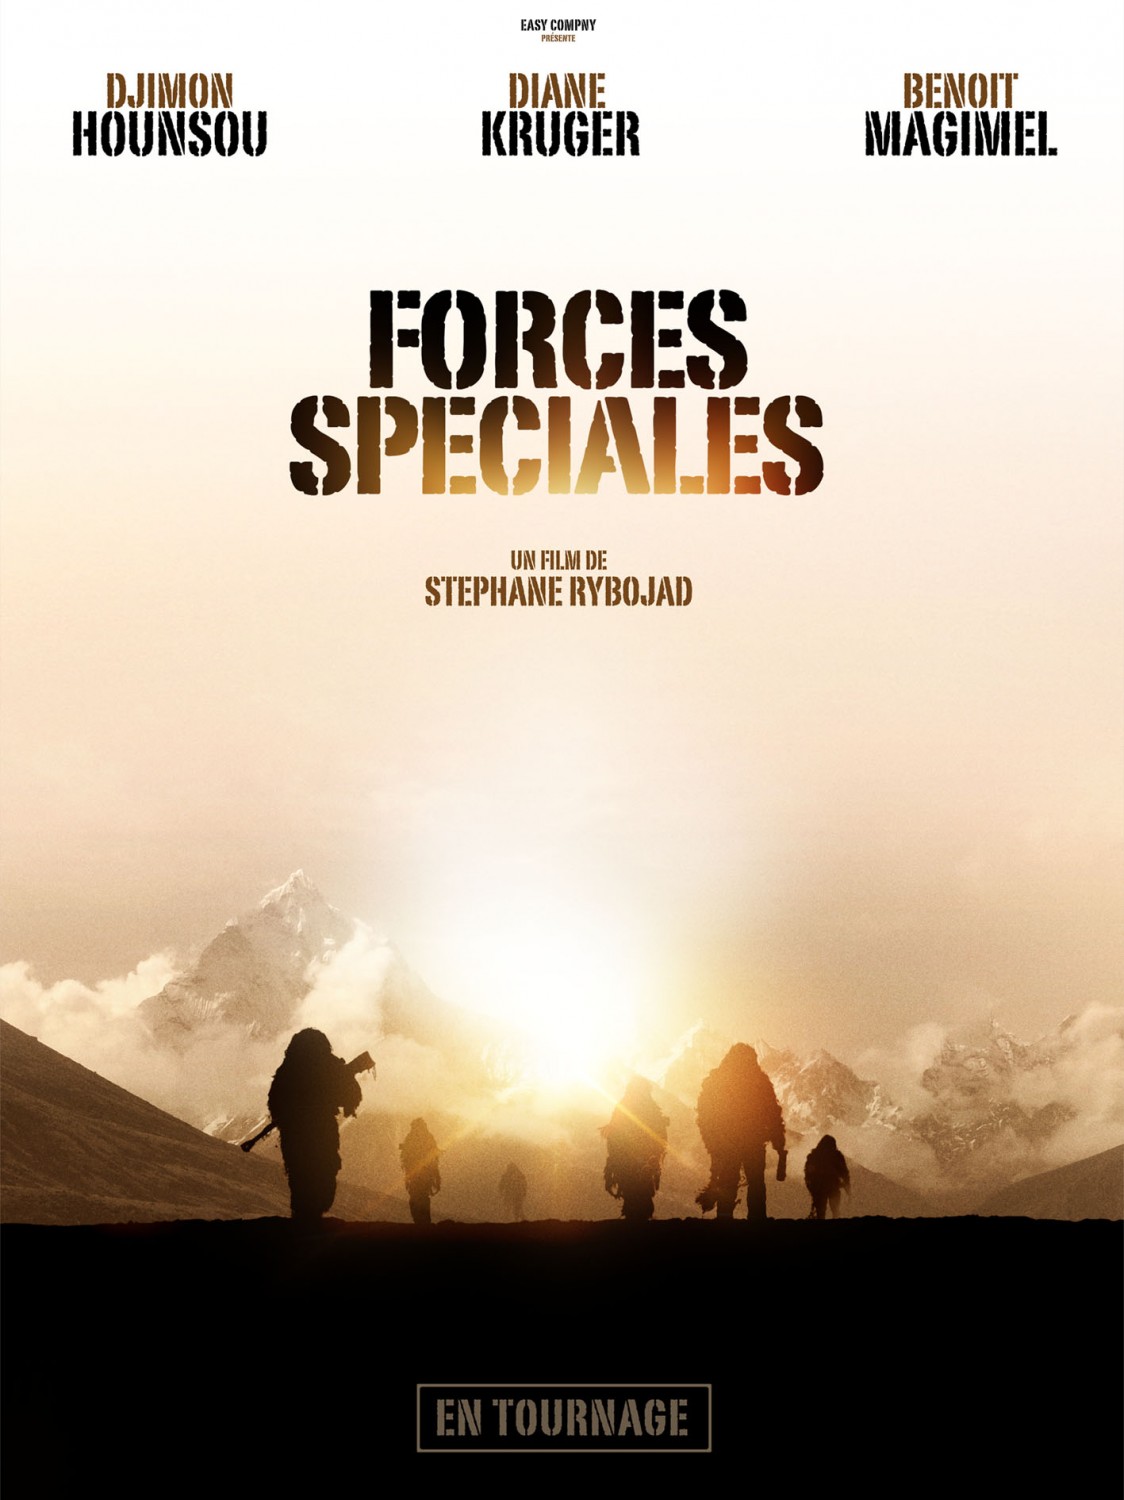 Extra Large Movie Poster Image for Forces spéciales (#5 of 6)